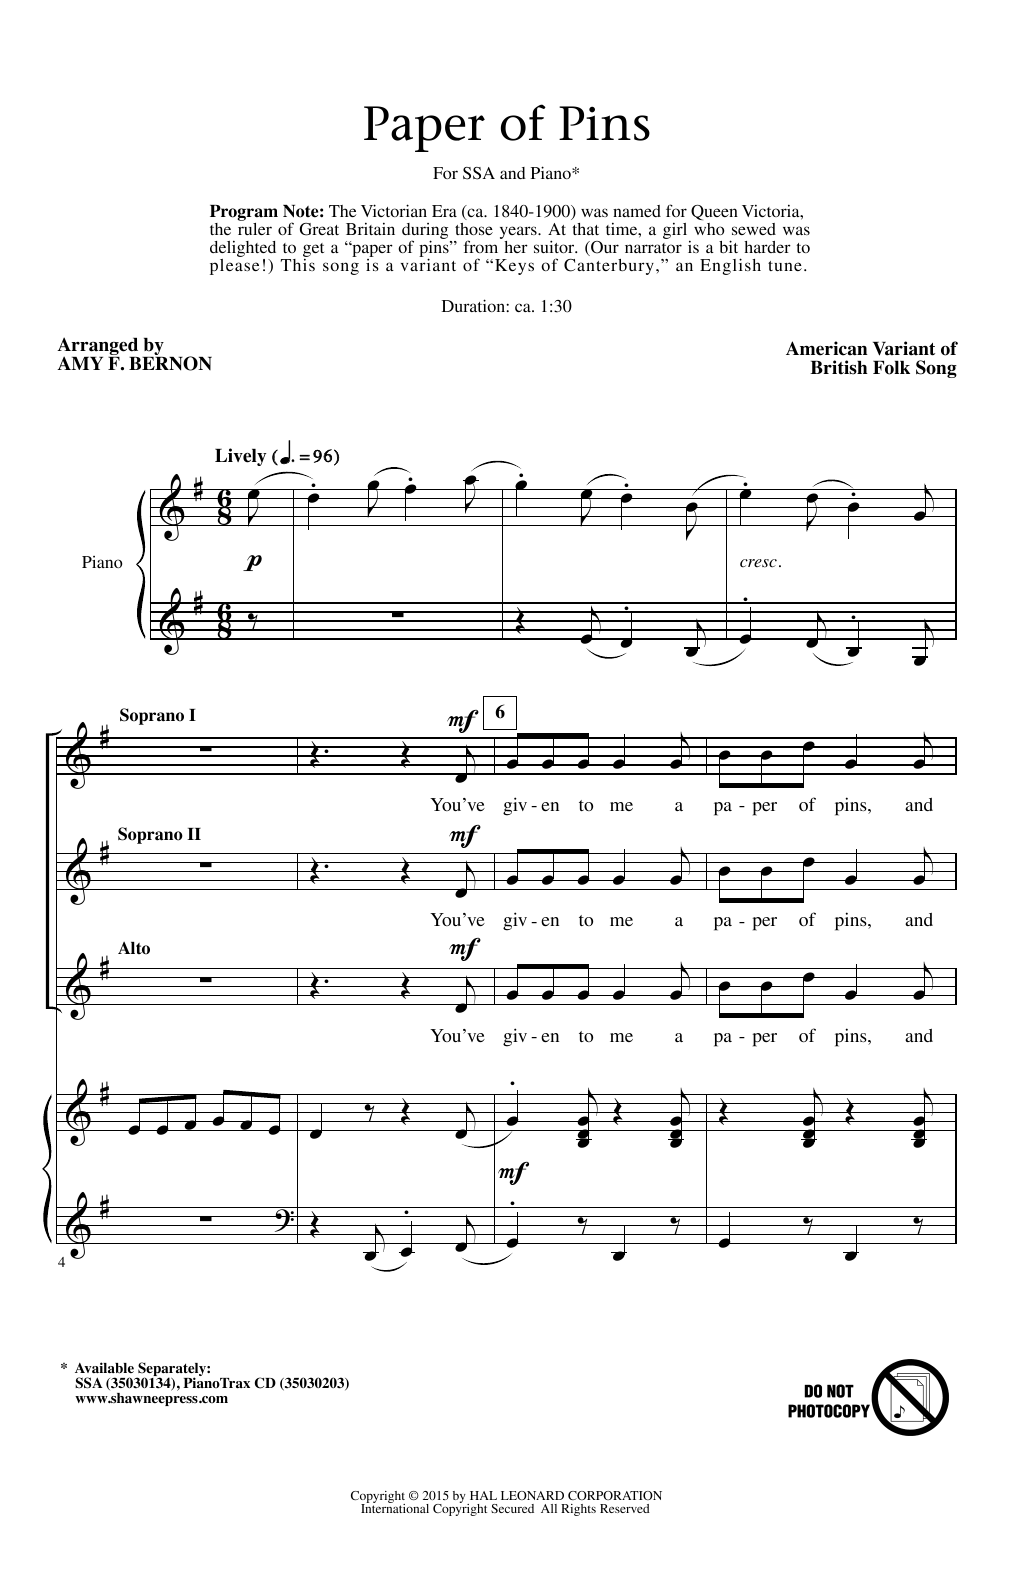 Download Amy Bernon A Paper Of Pins Sheet Music